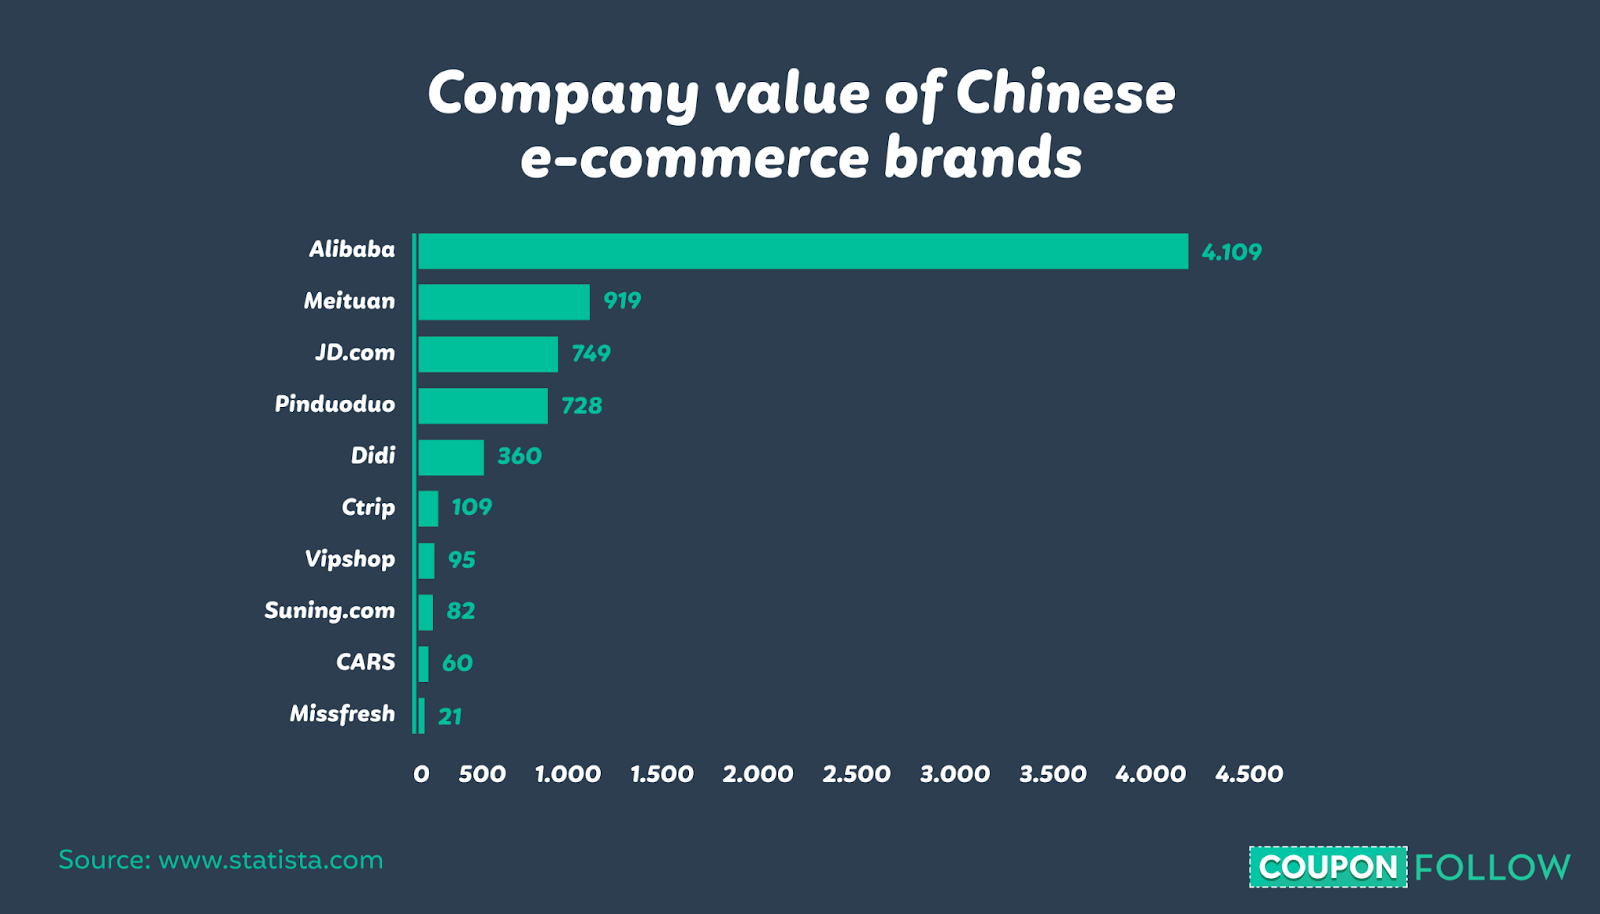 Top Chinese ecommerce companies